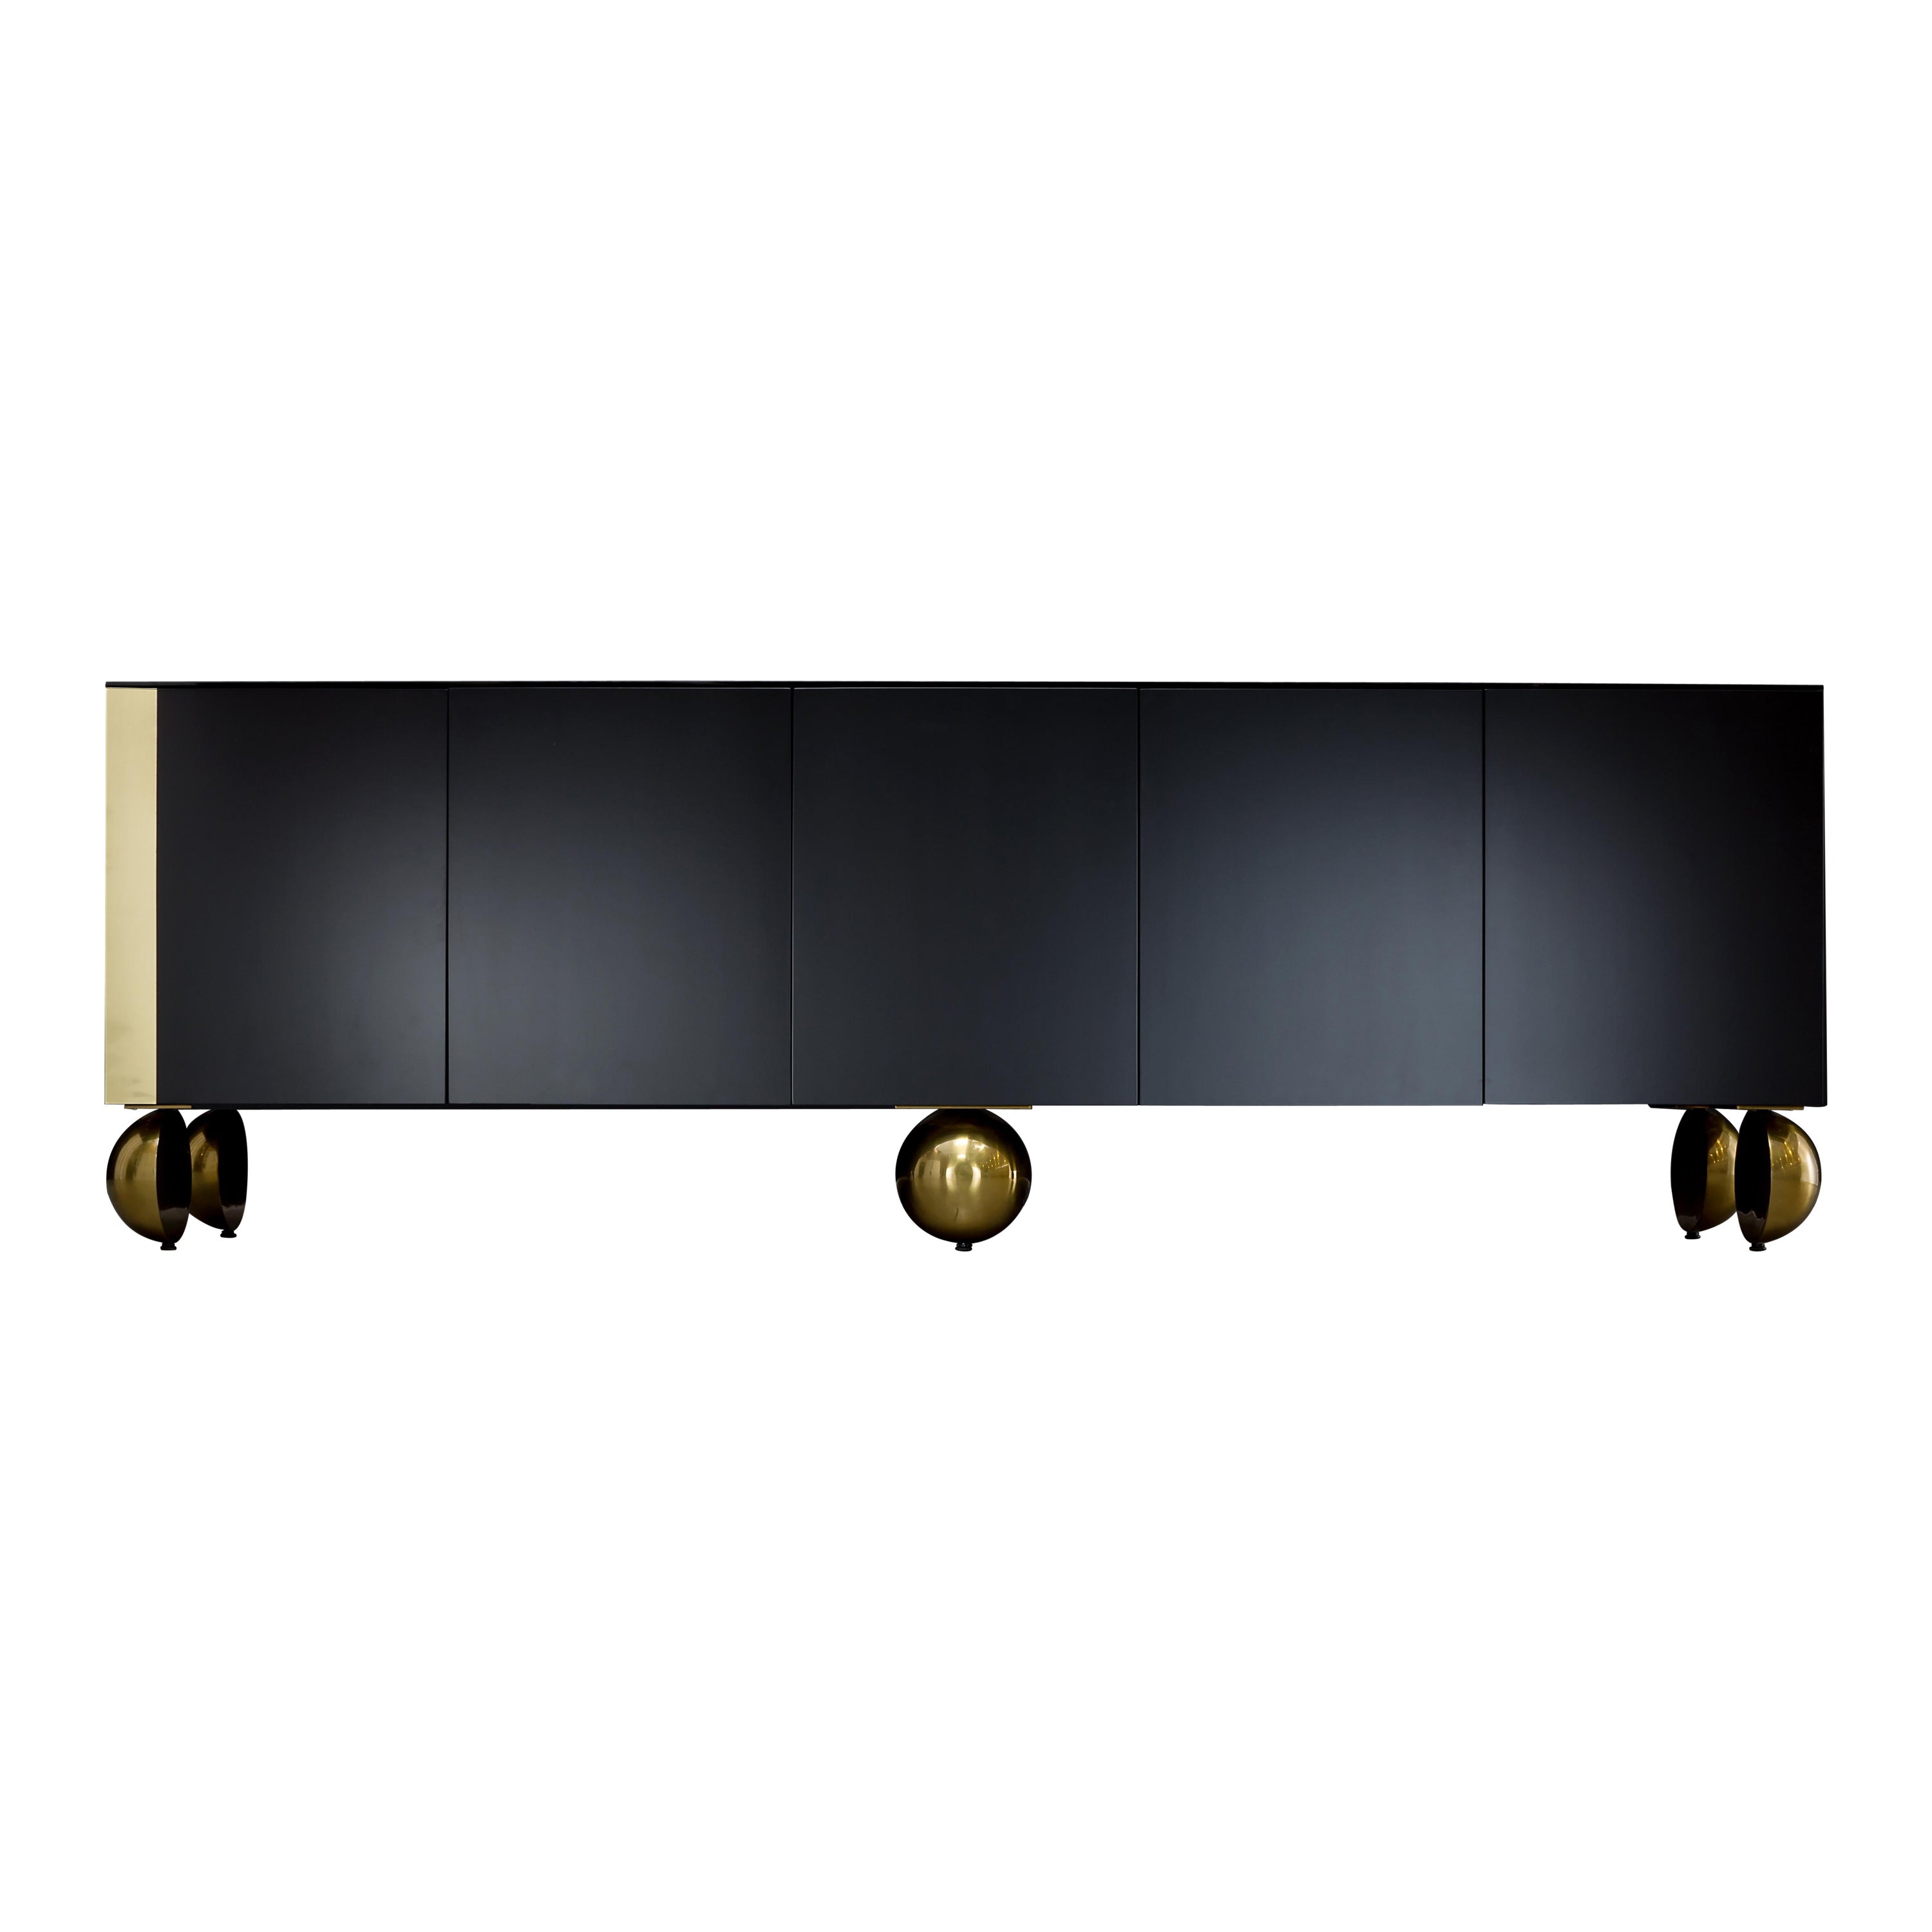 BALL CREDENZA XTRA - Modern Black Lacquer with Metal Inlay and Metallic Legs